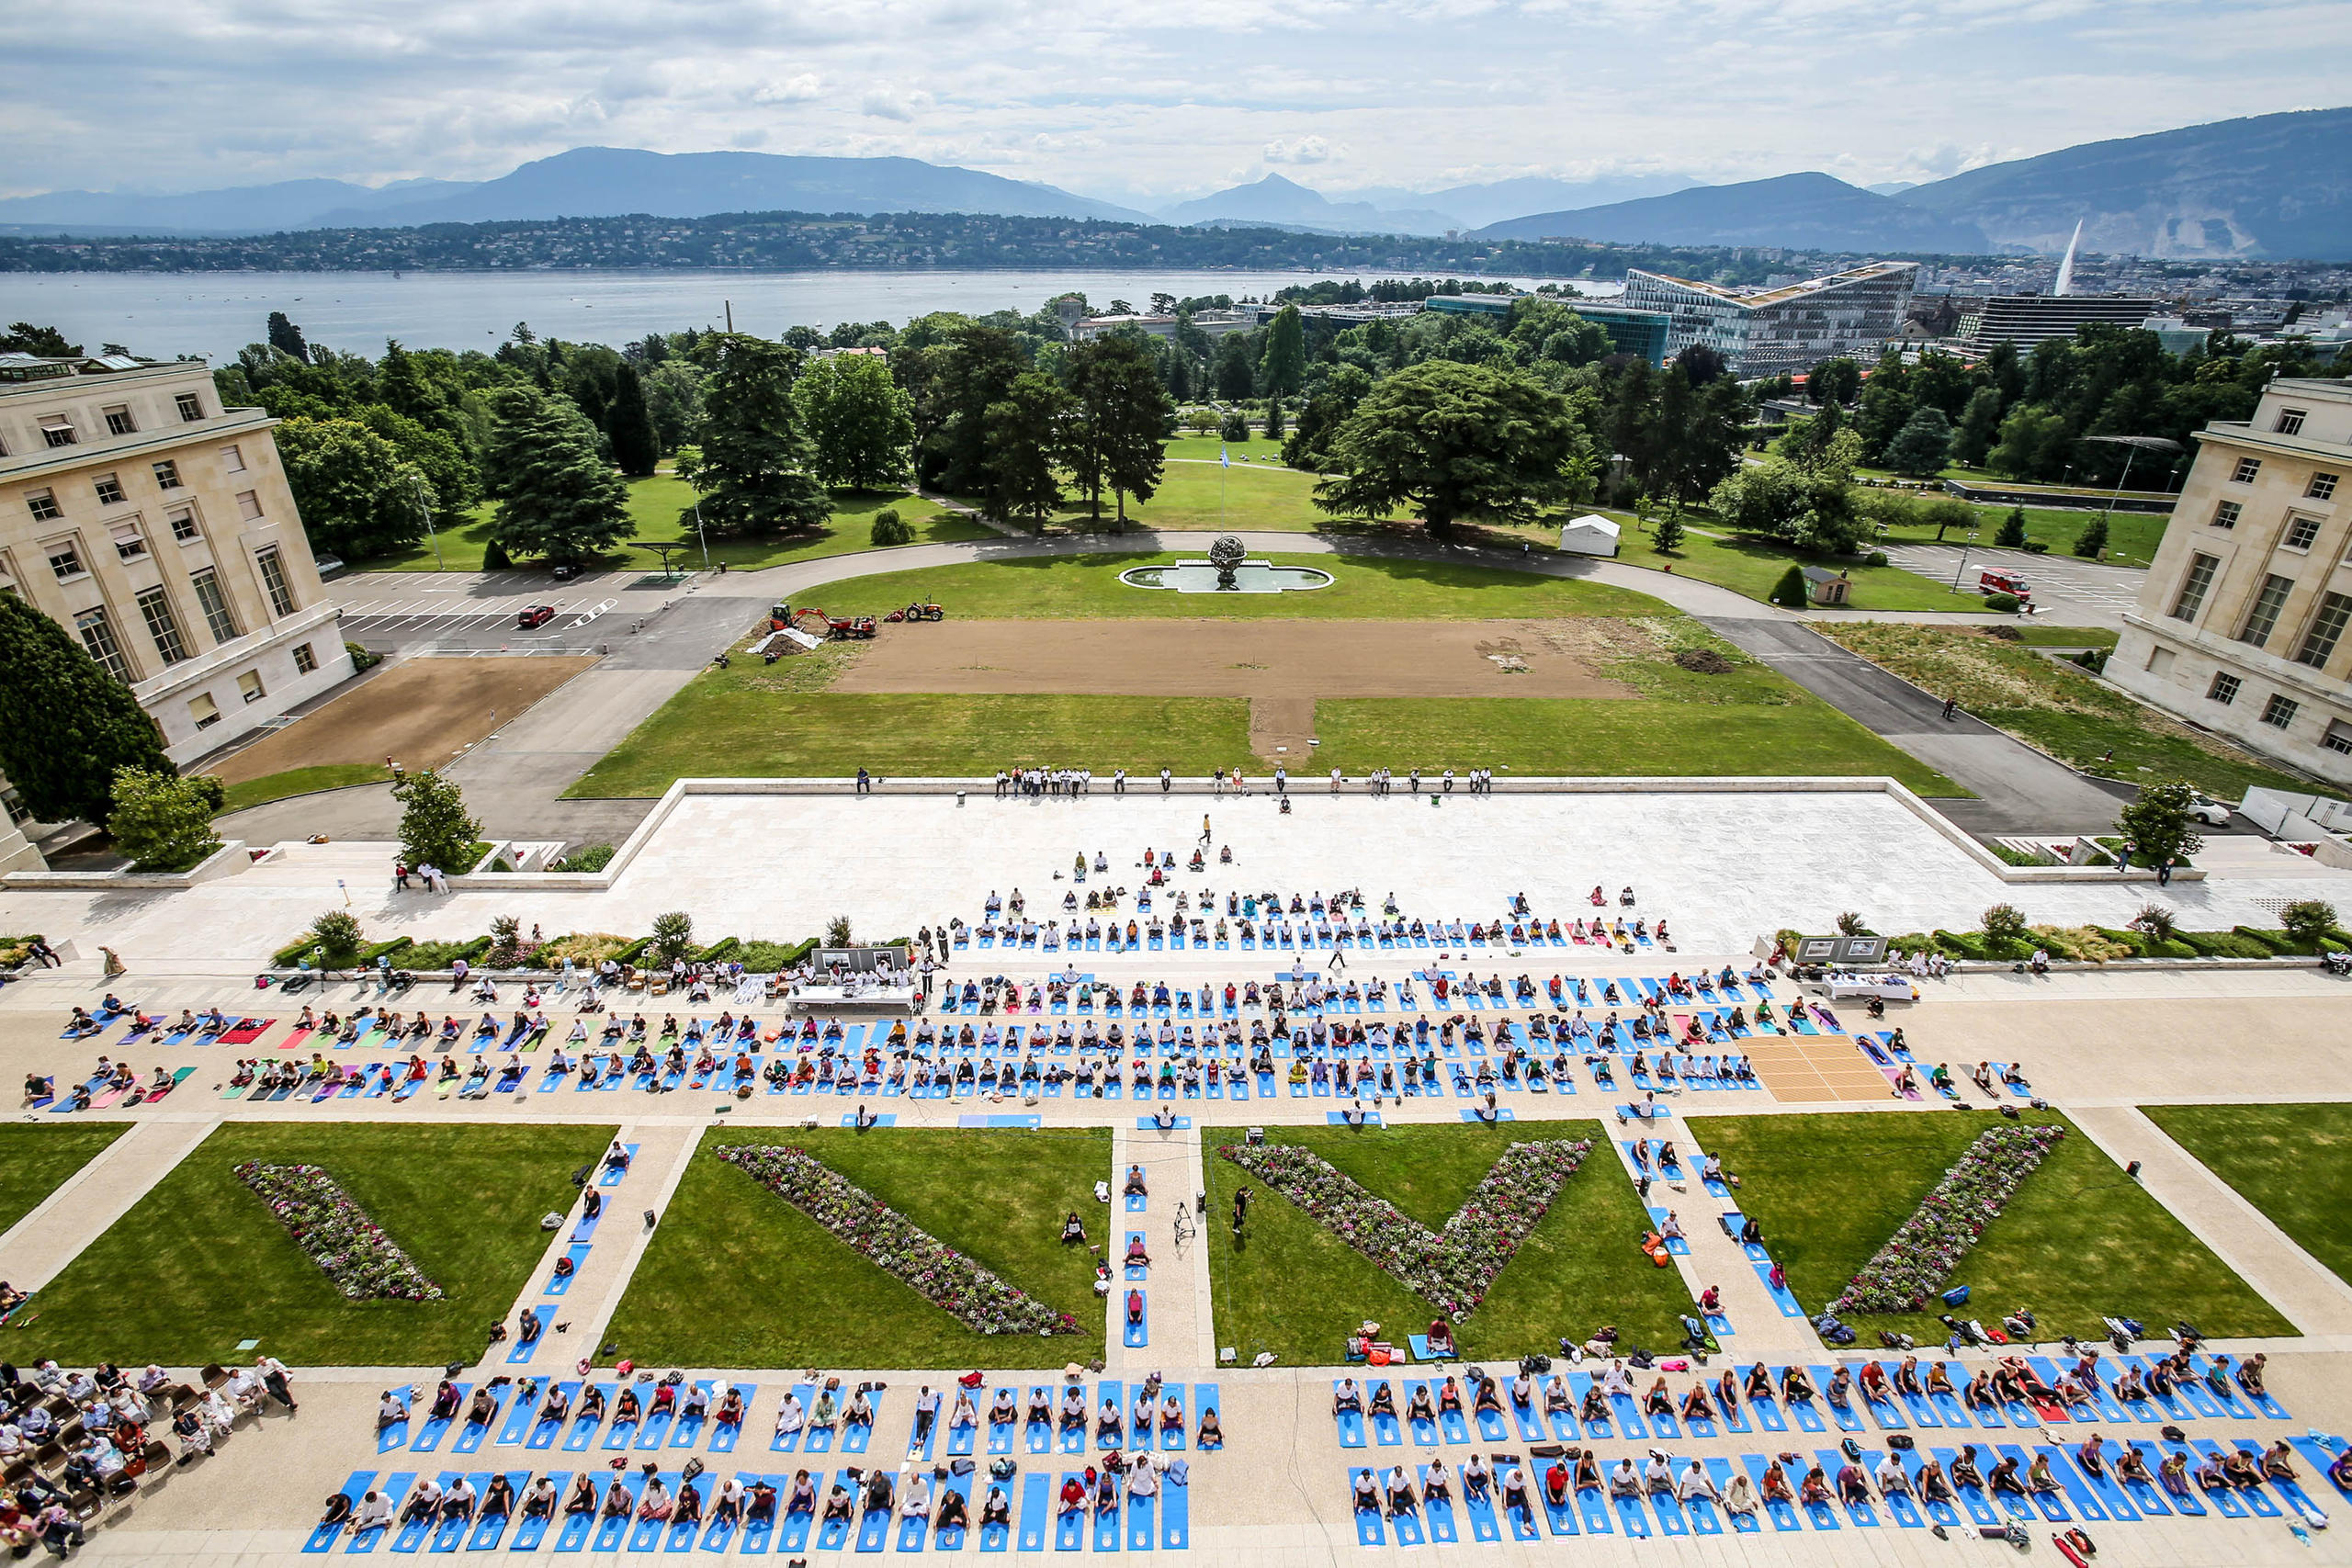 Staff at UN practicing yoga outside